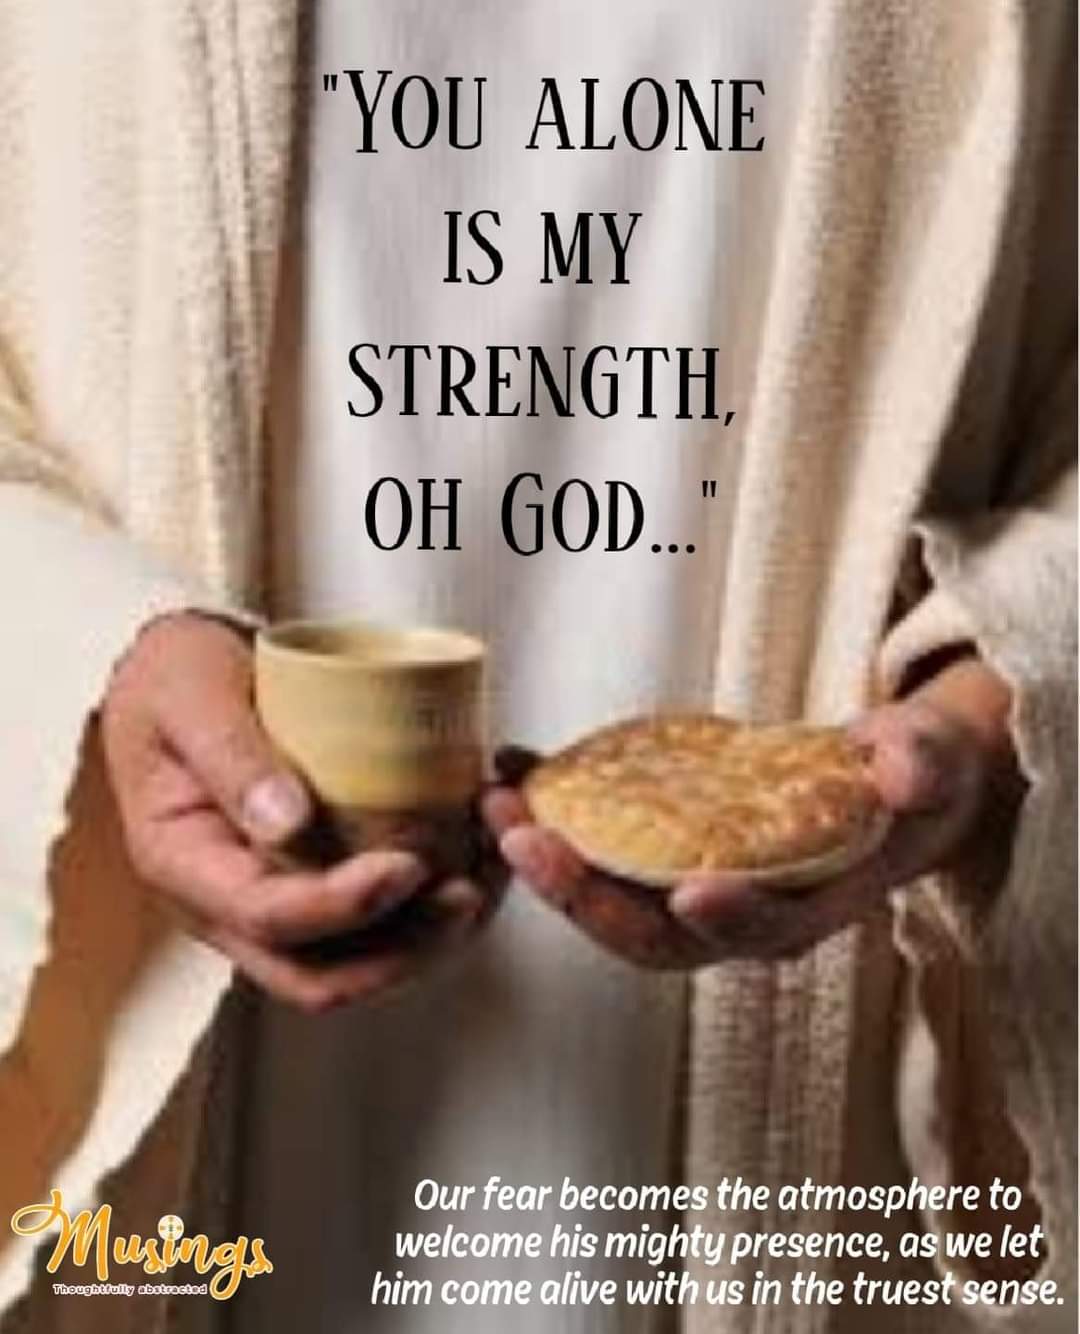 "YOU ALONE IS MY STRENGTH, OH GOD..."